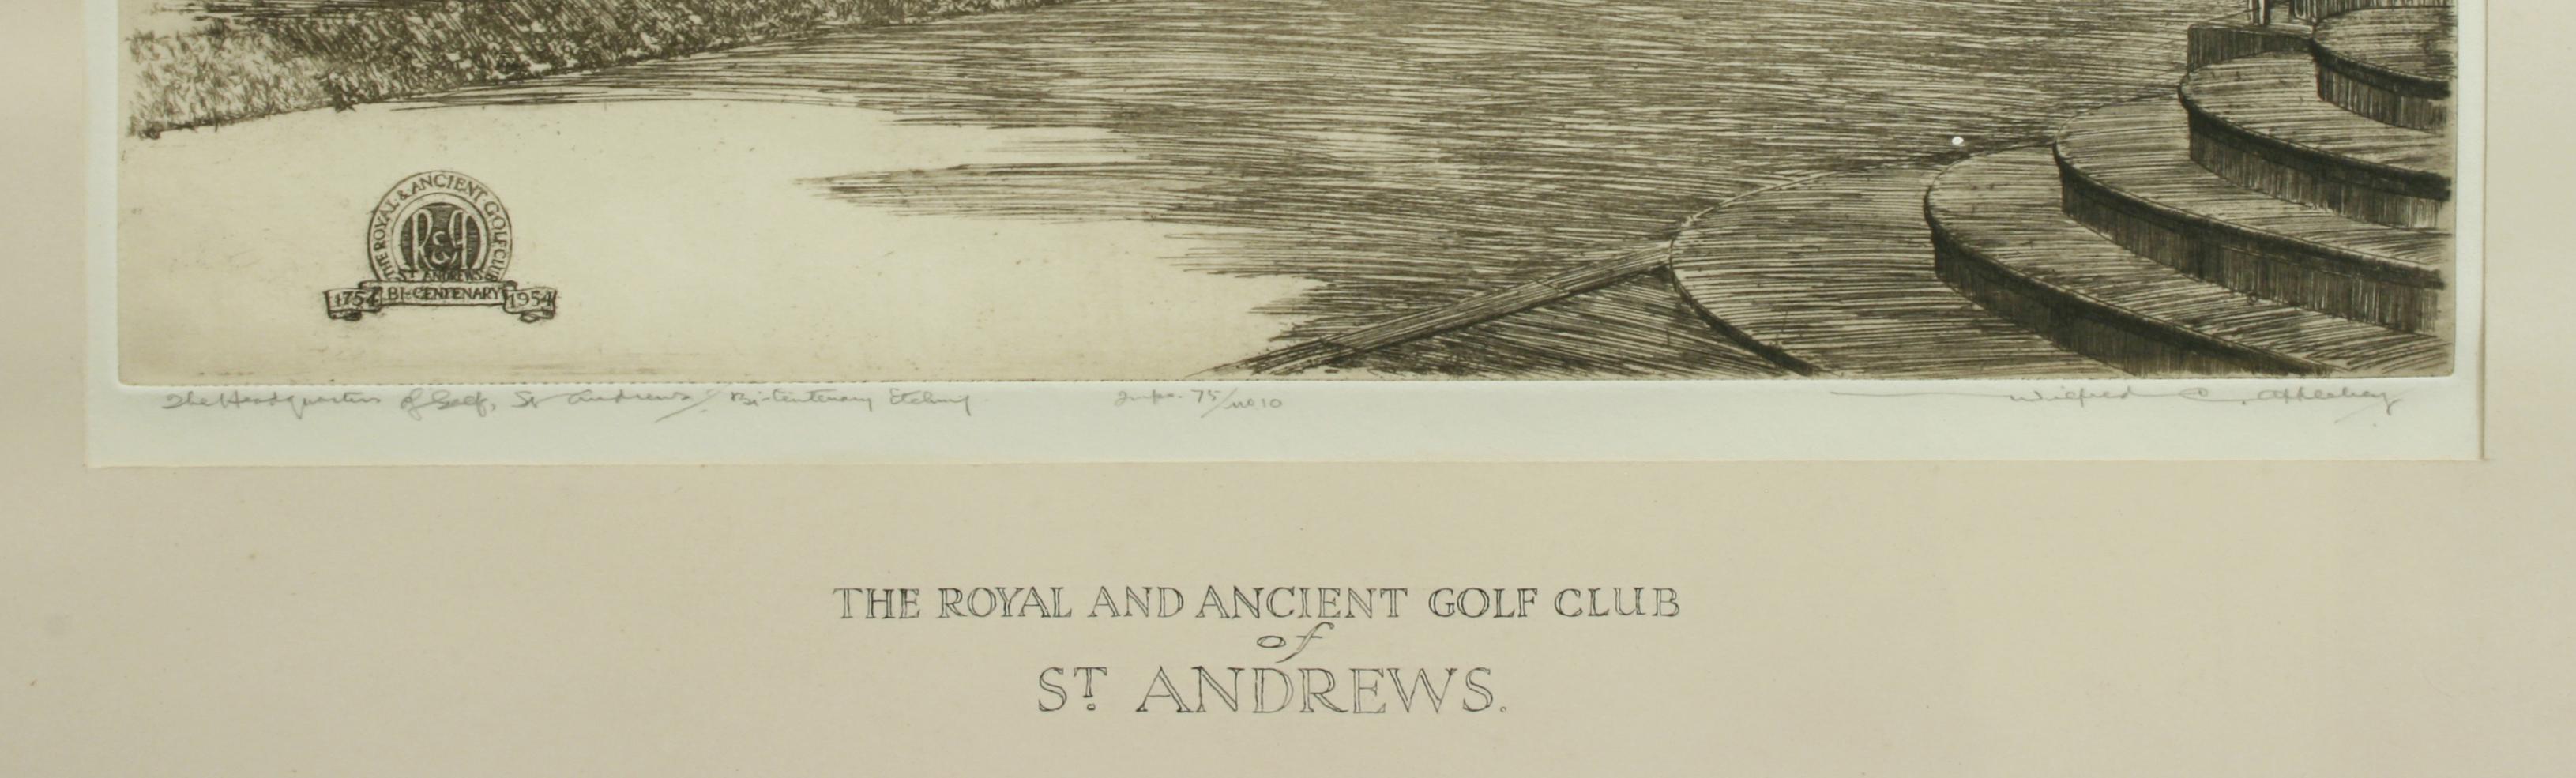 Paper St Andrews Golf Club, Bicentenary Etching, Ltd Edition 10/75 For Sale